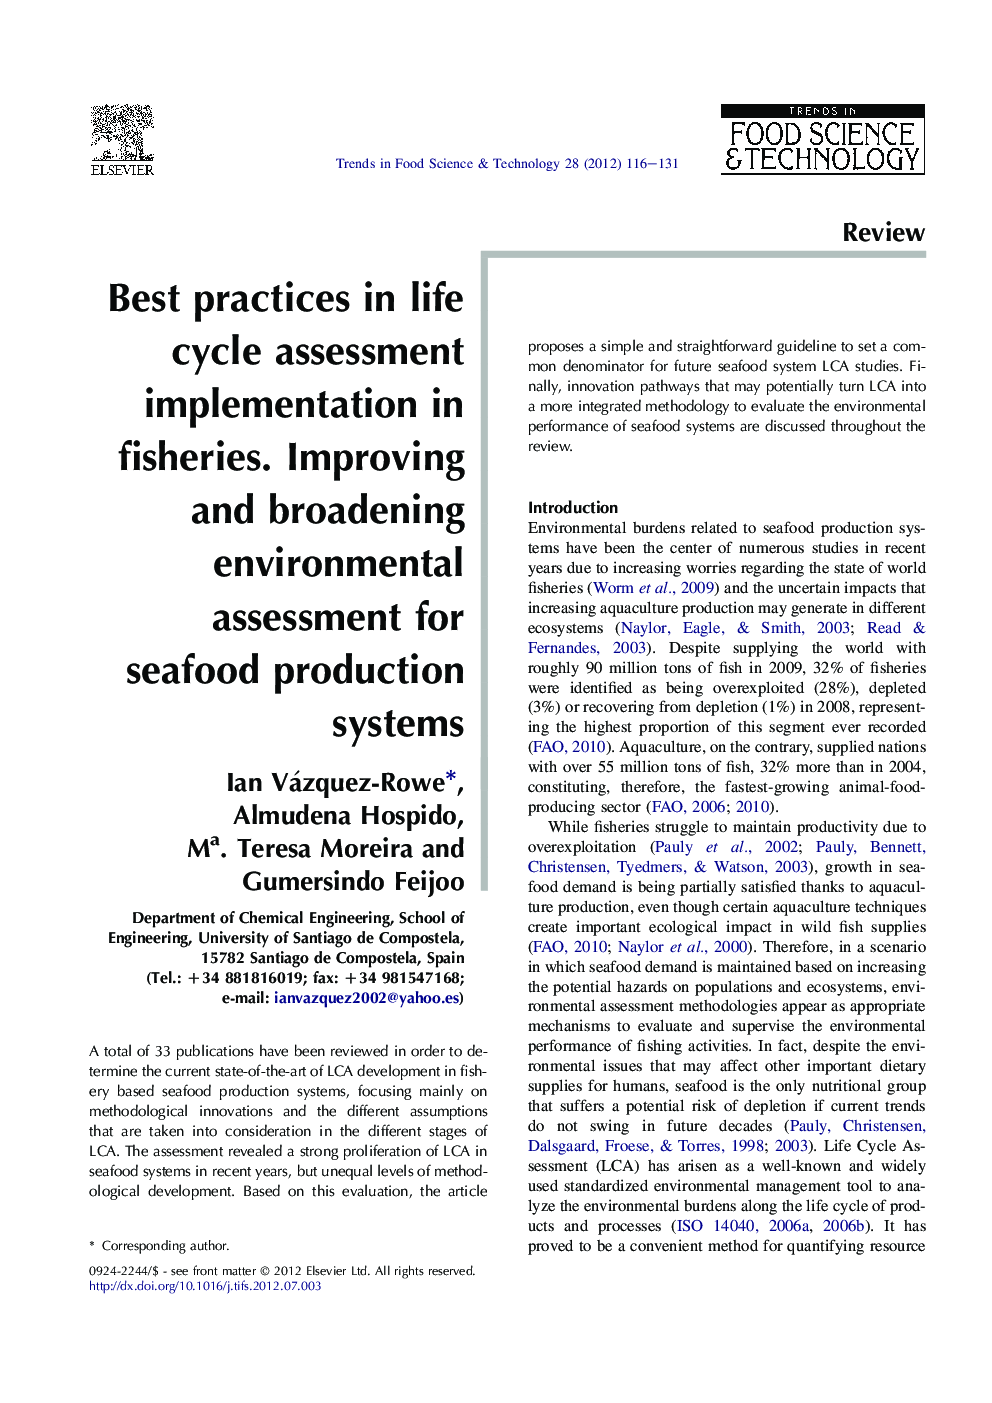 Best practices in life cycle assessment implementation in fisheries. Improving and broadening environmental assessment for seafood production systems